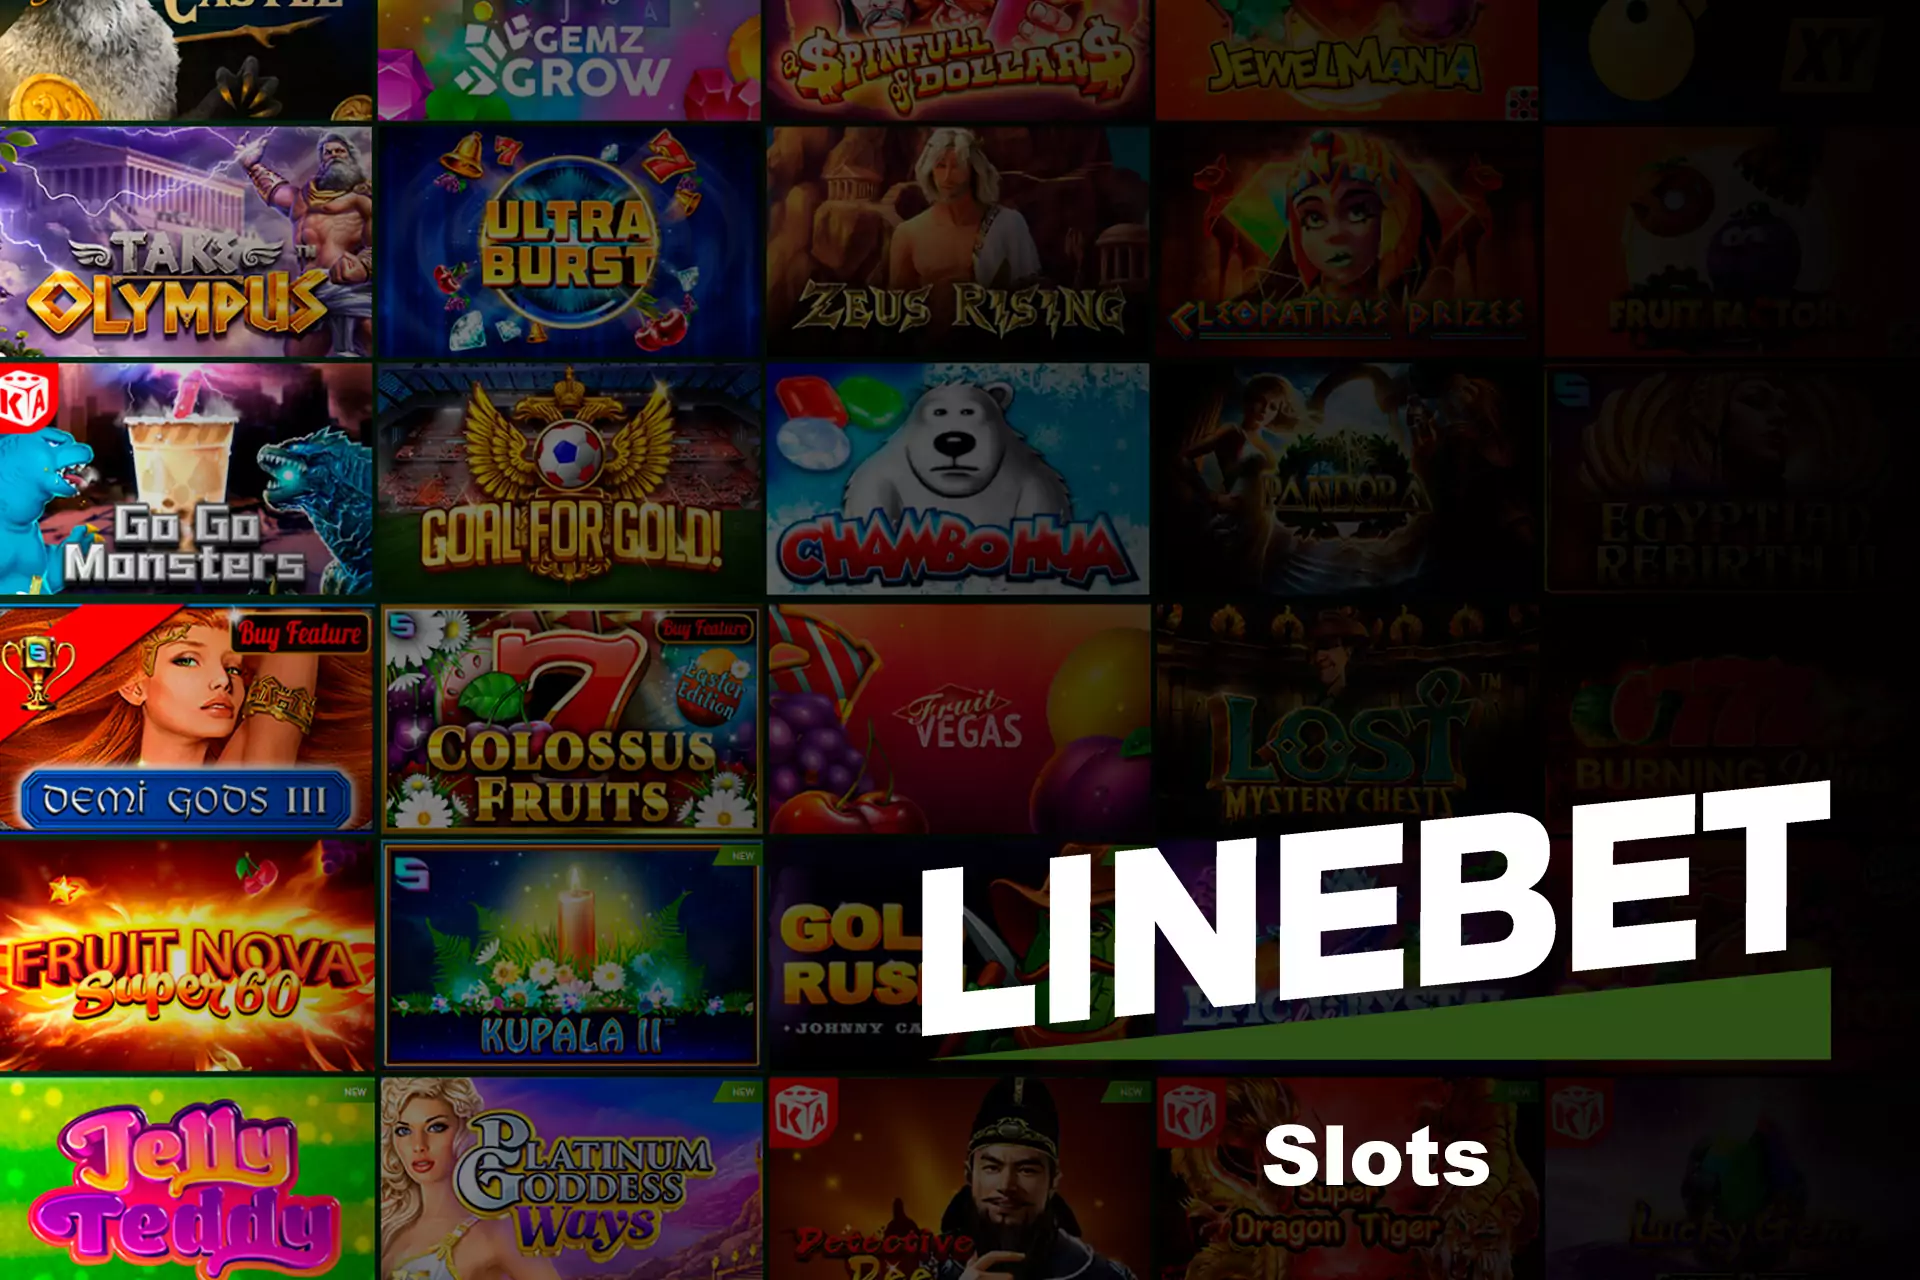 At Linebet there are lots of slots machine made by different providers.